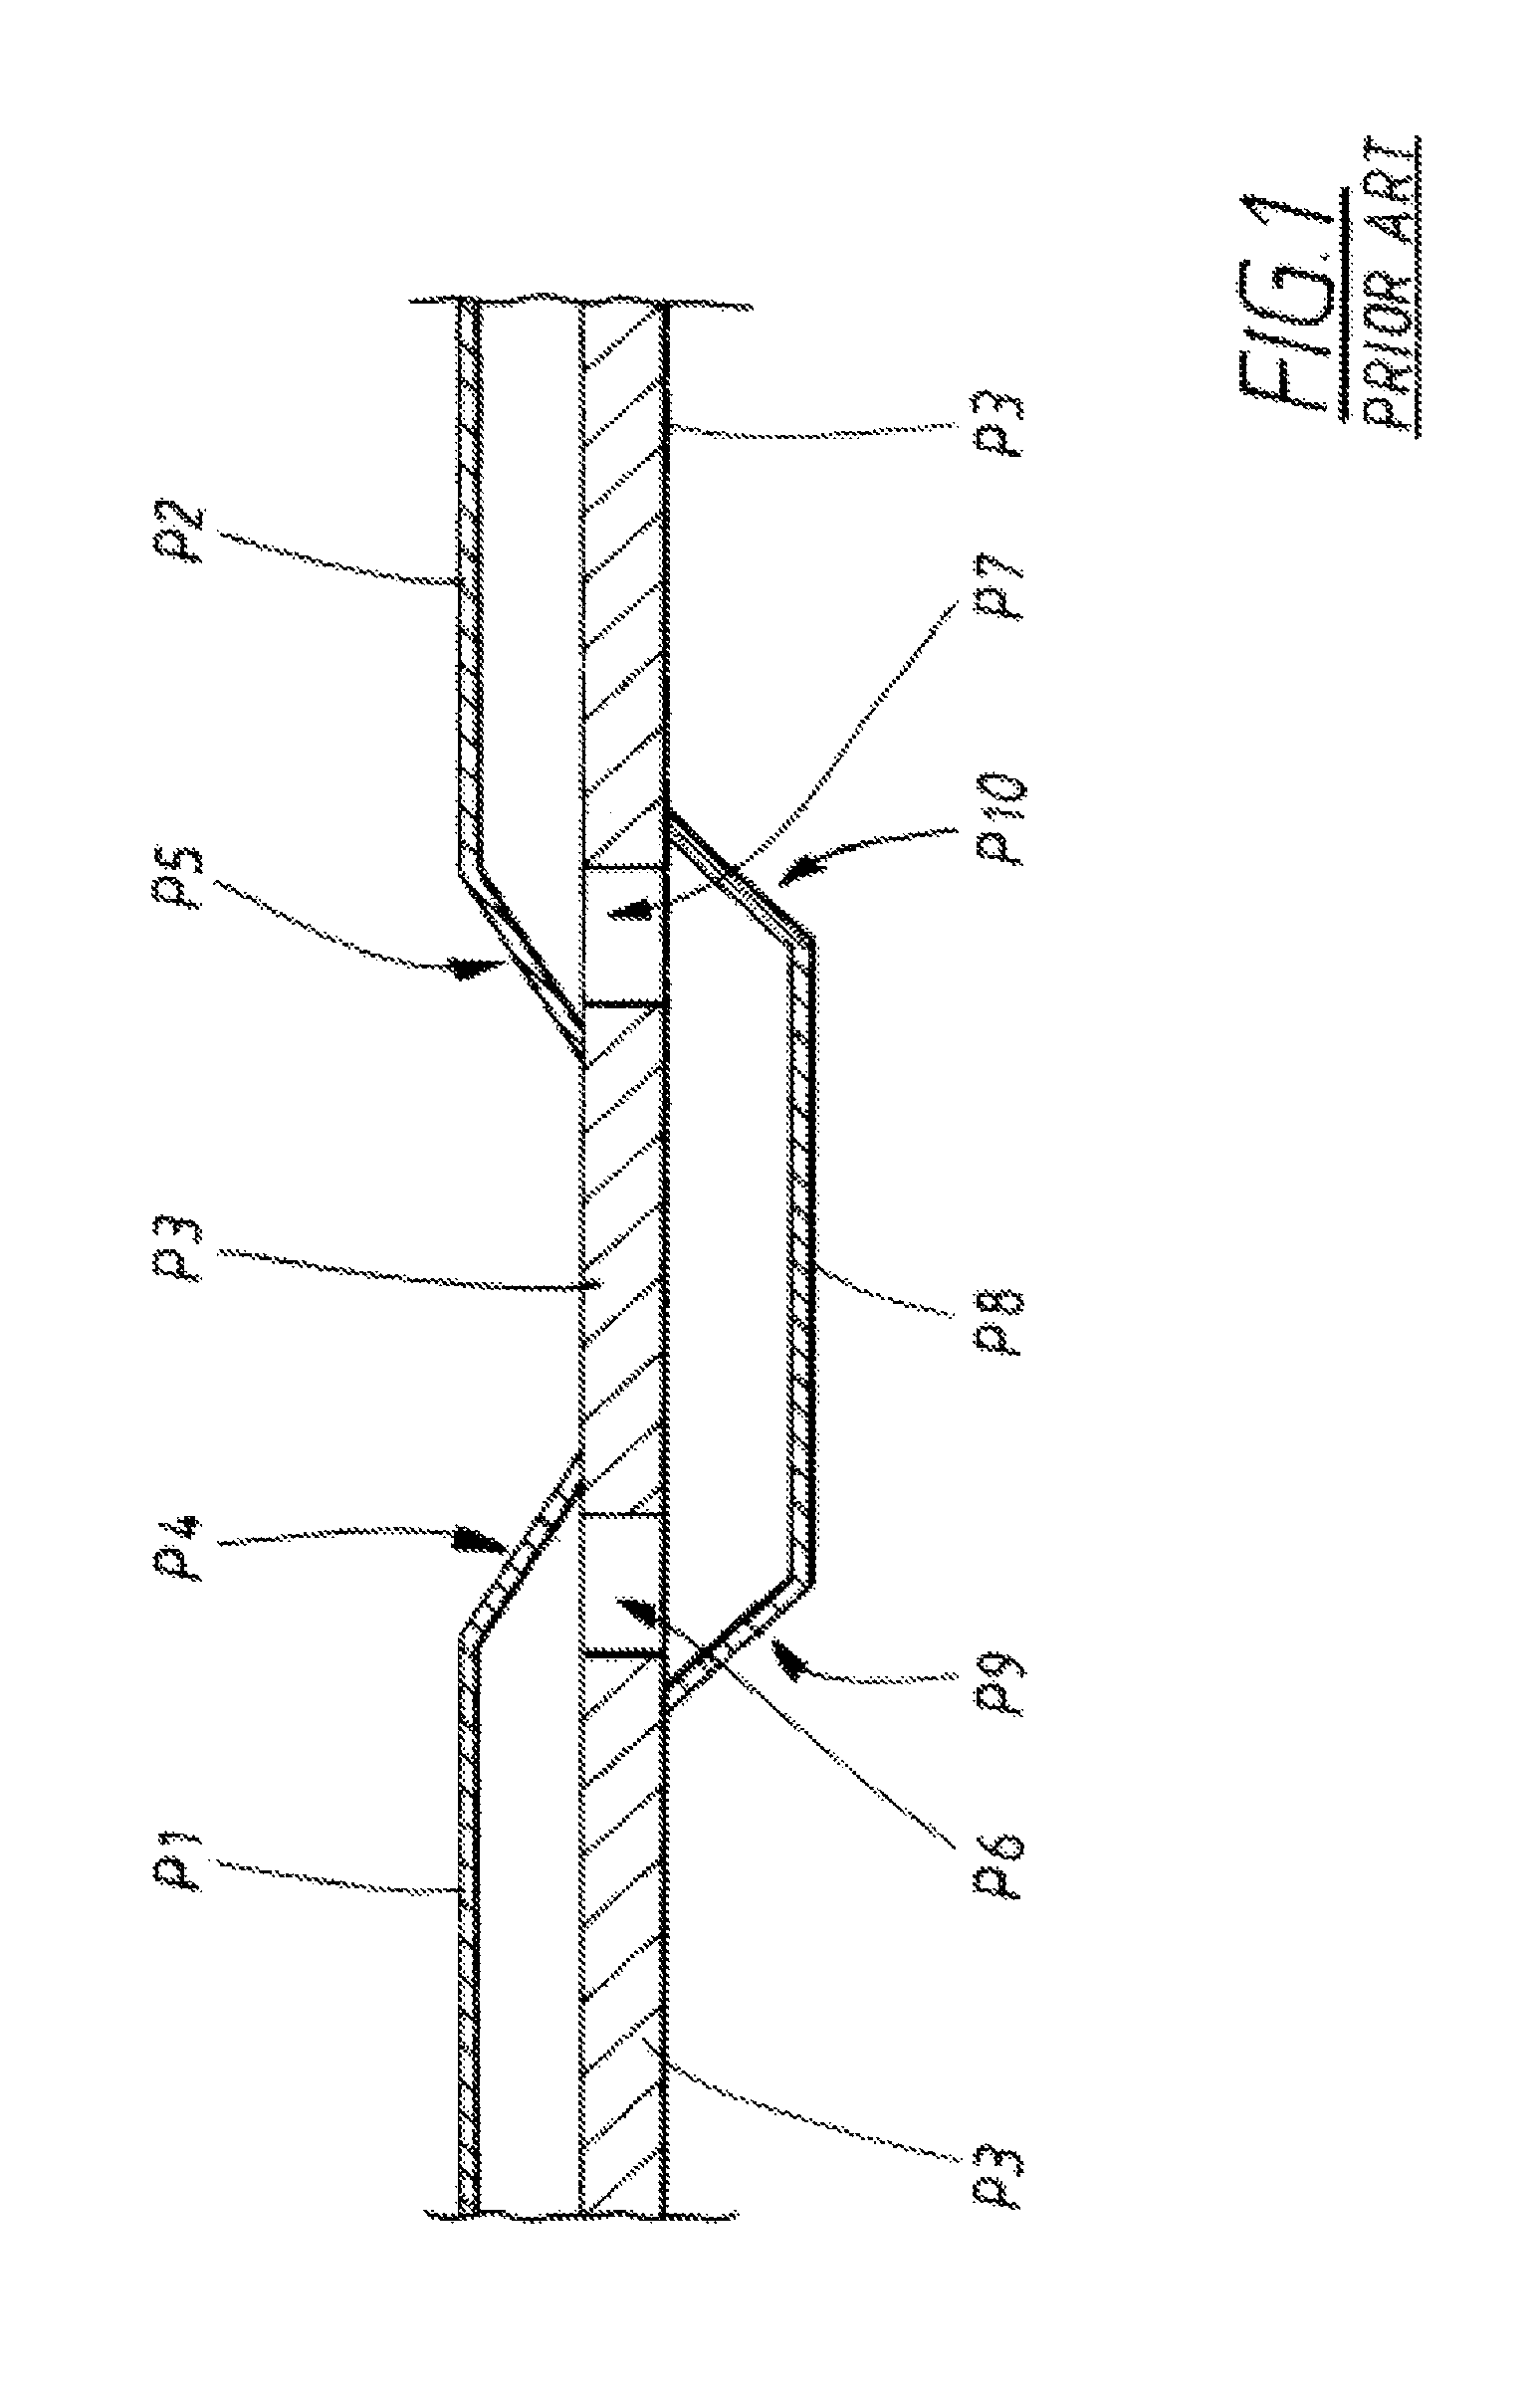 First and second U-shape waveguides joined to a dielectric carrier by a U-shape sealing frame